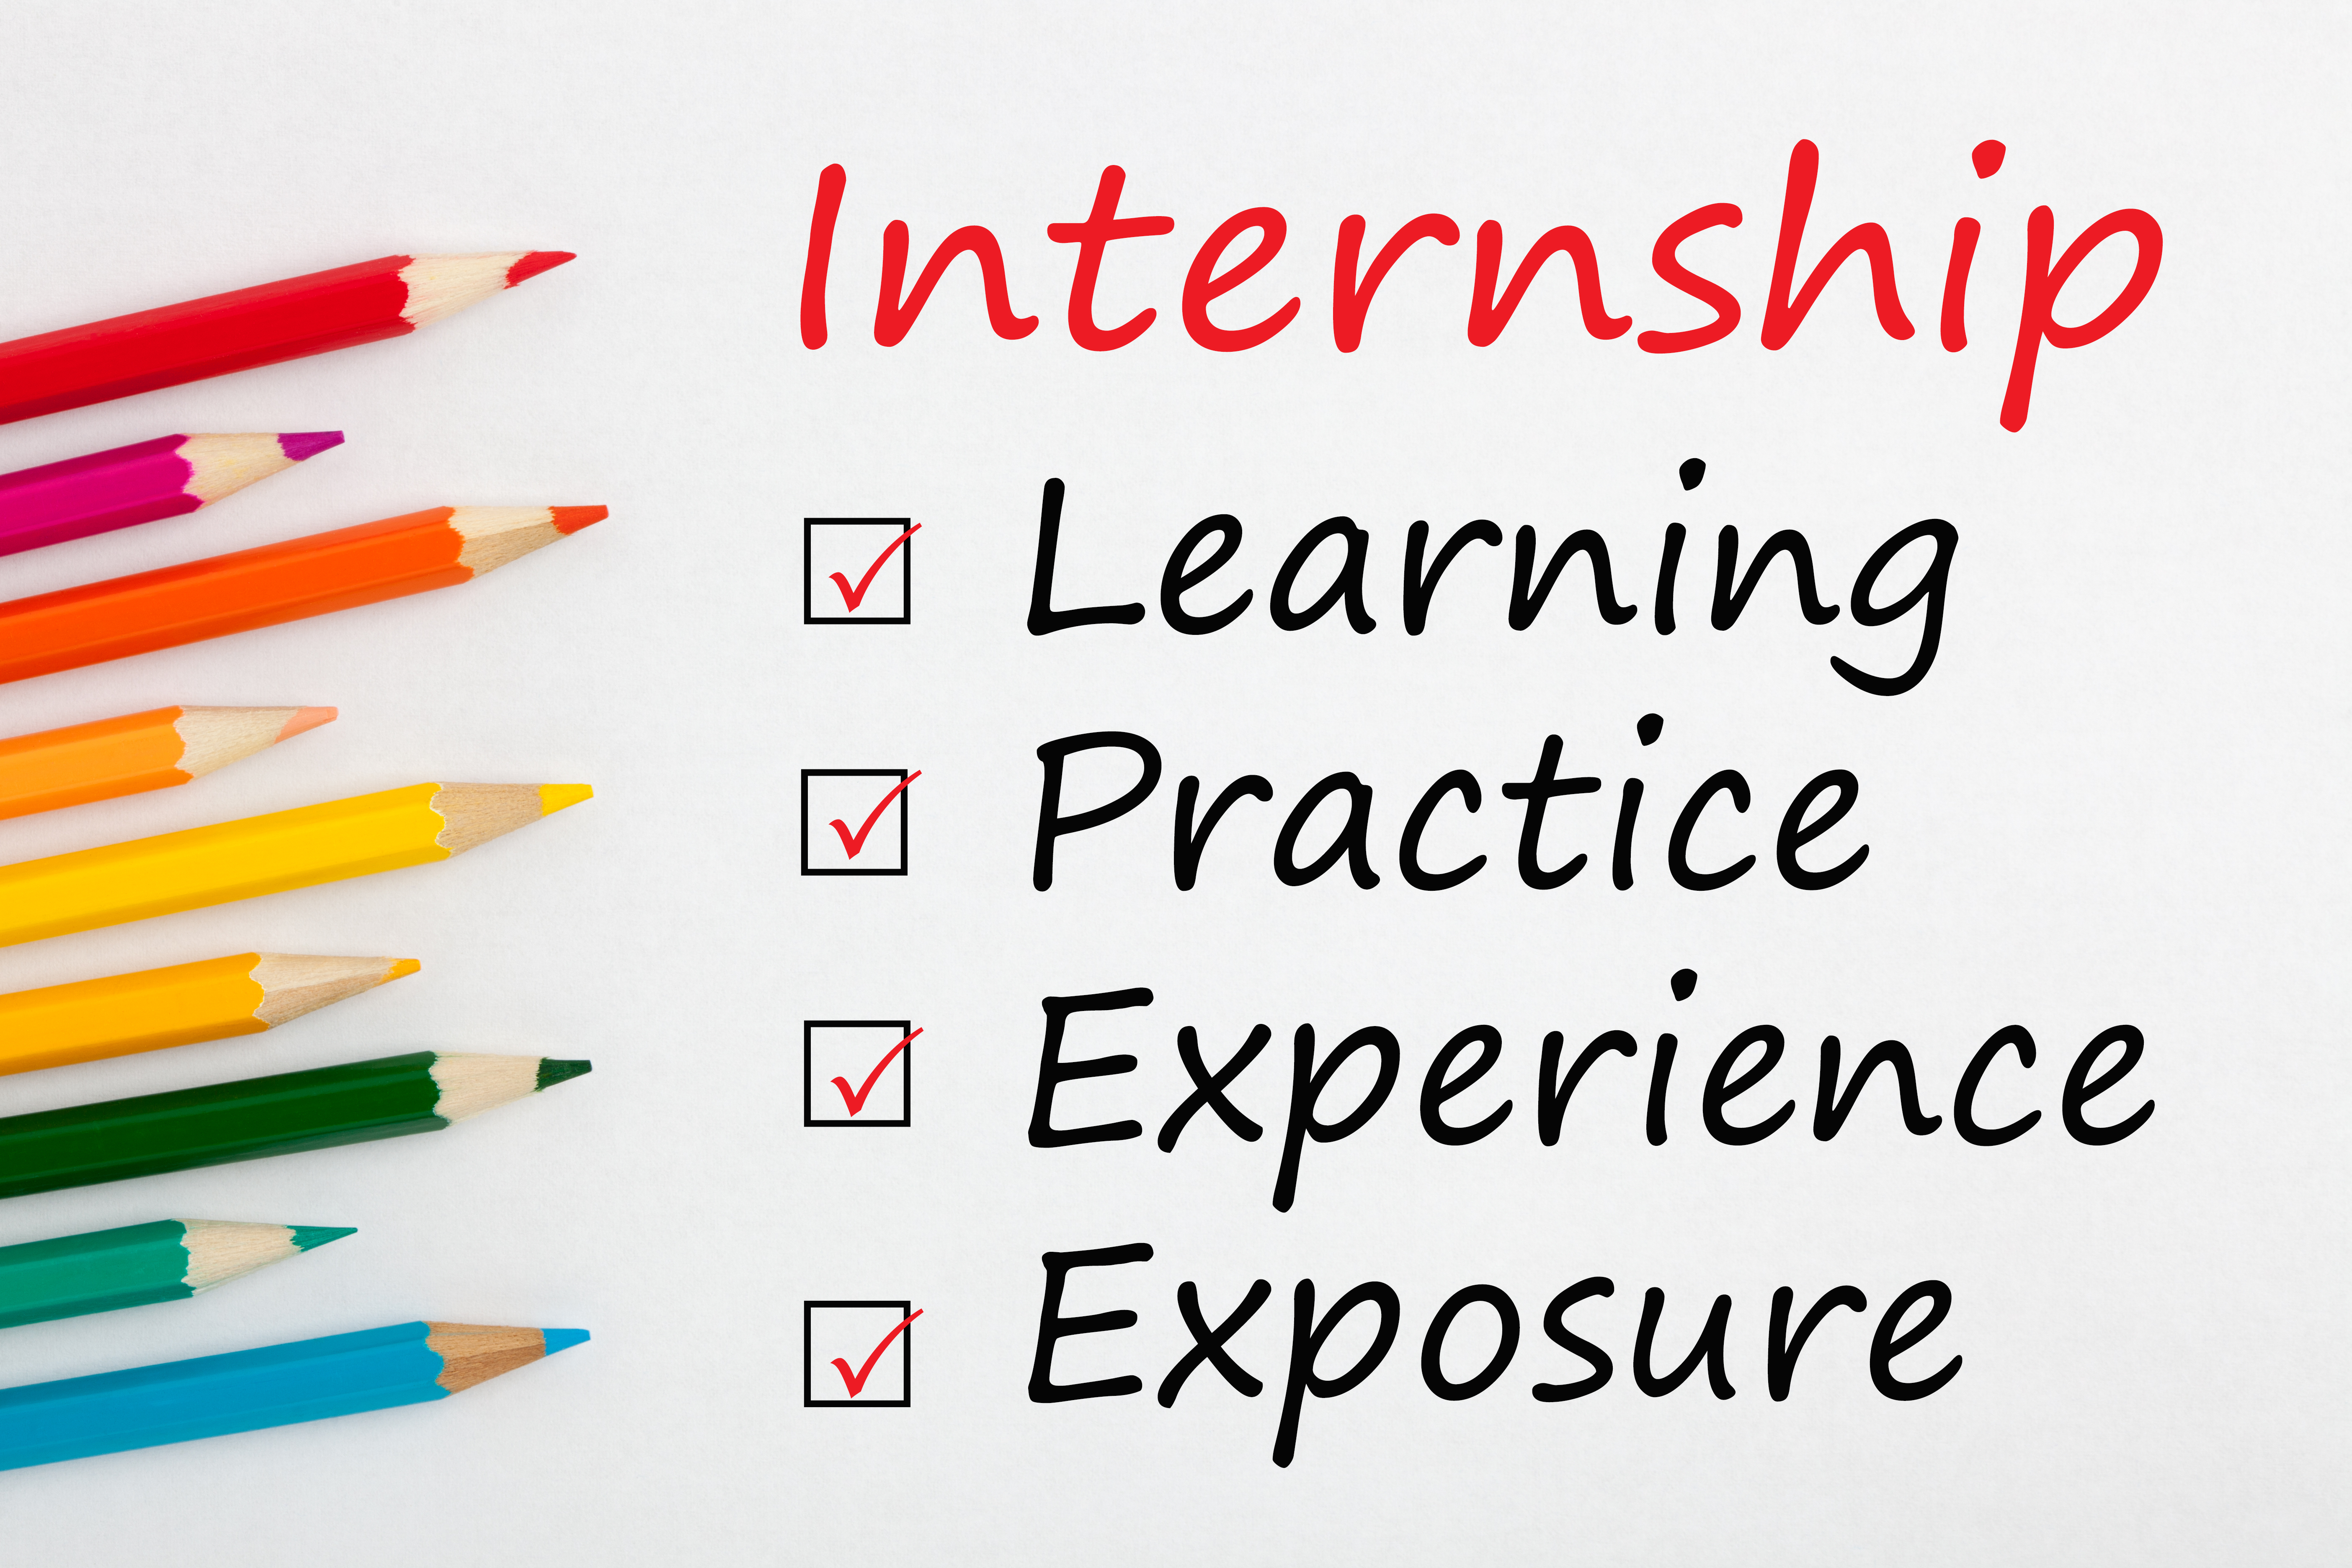 Internship image learning, practice, experience, exposure